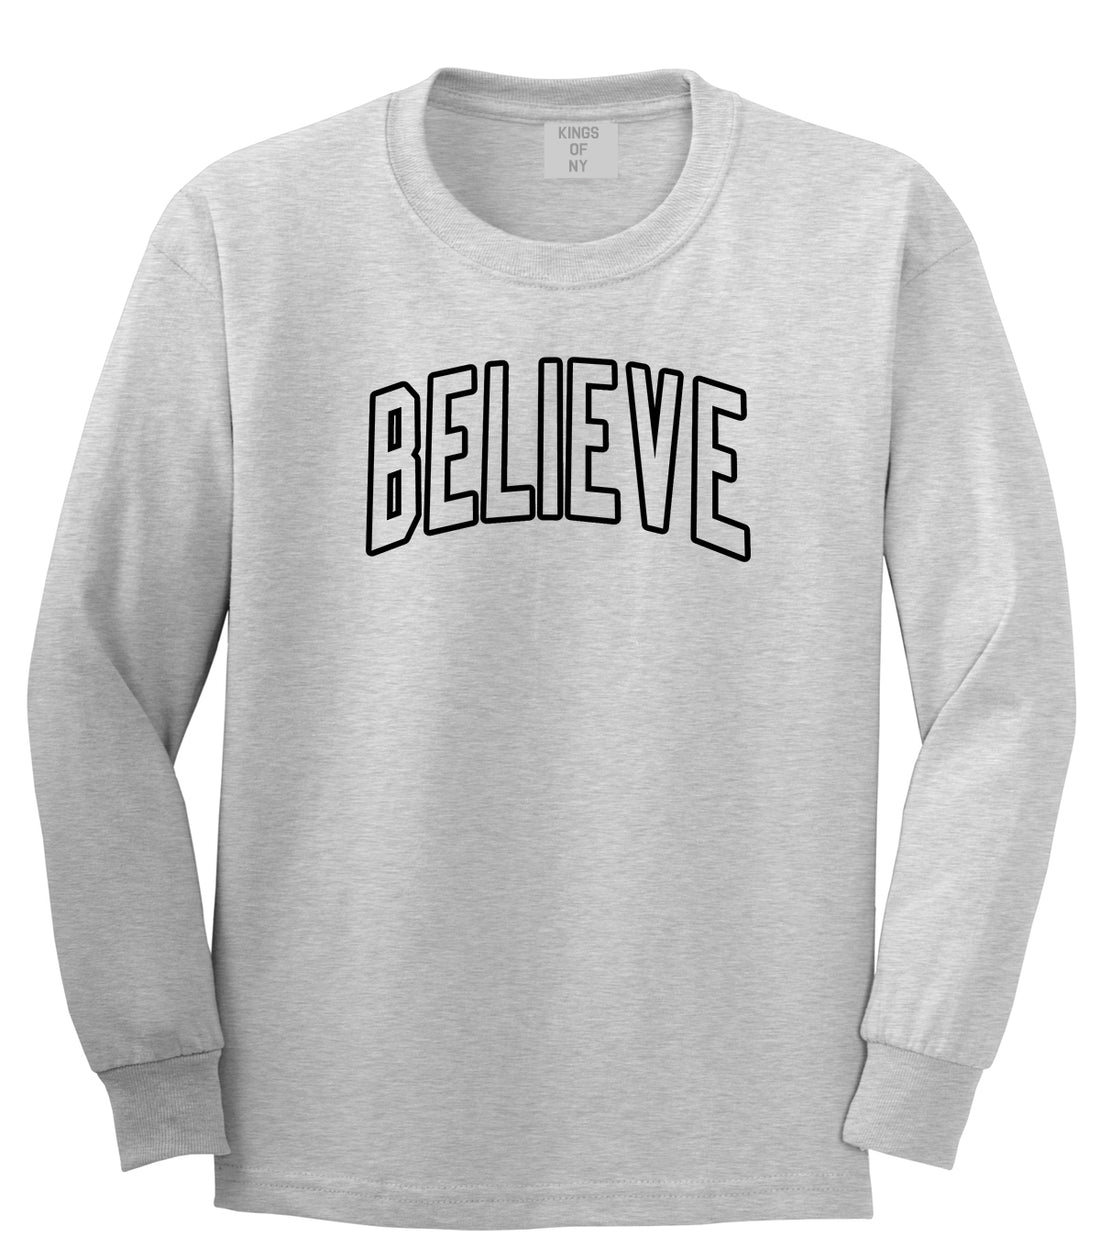 Believe Outline Mens Long Sleeve T-Shirt Grey by Kings Of NY